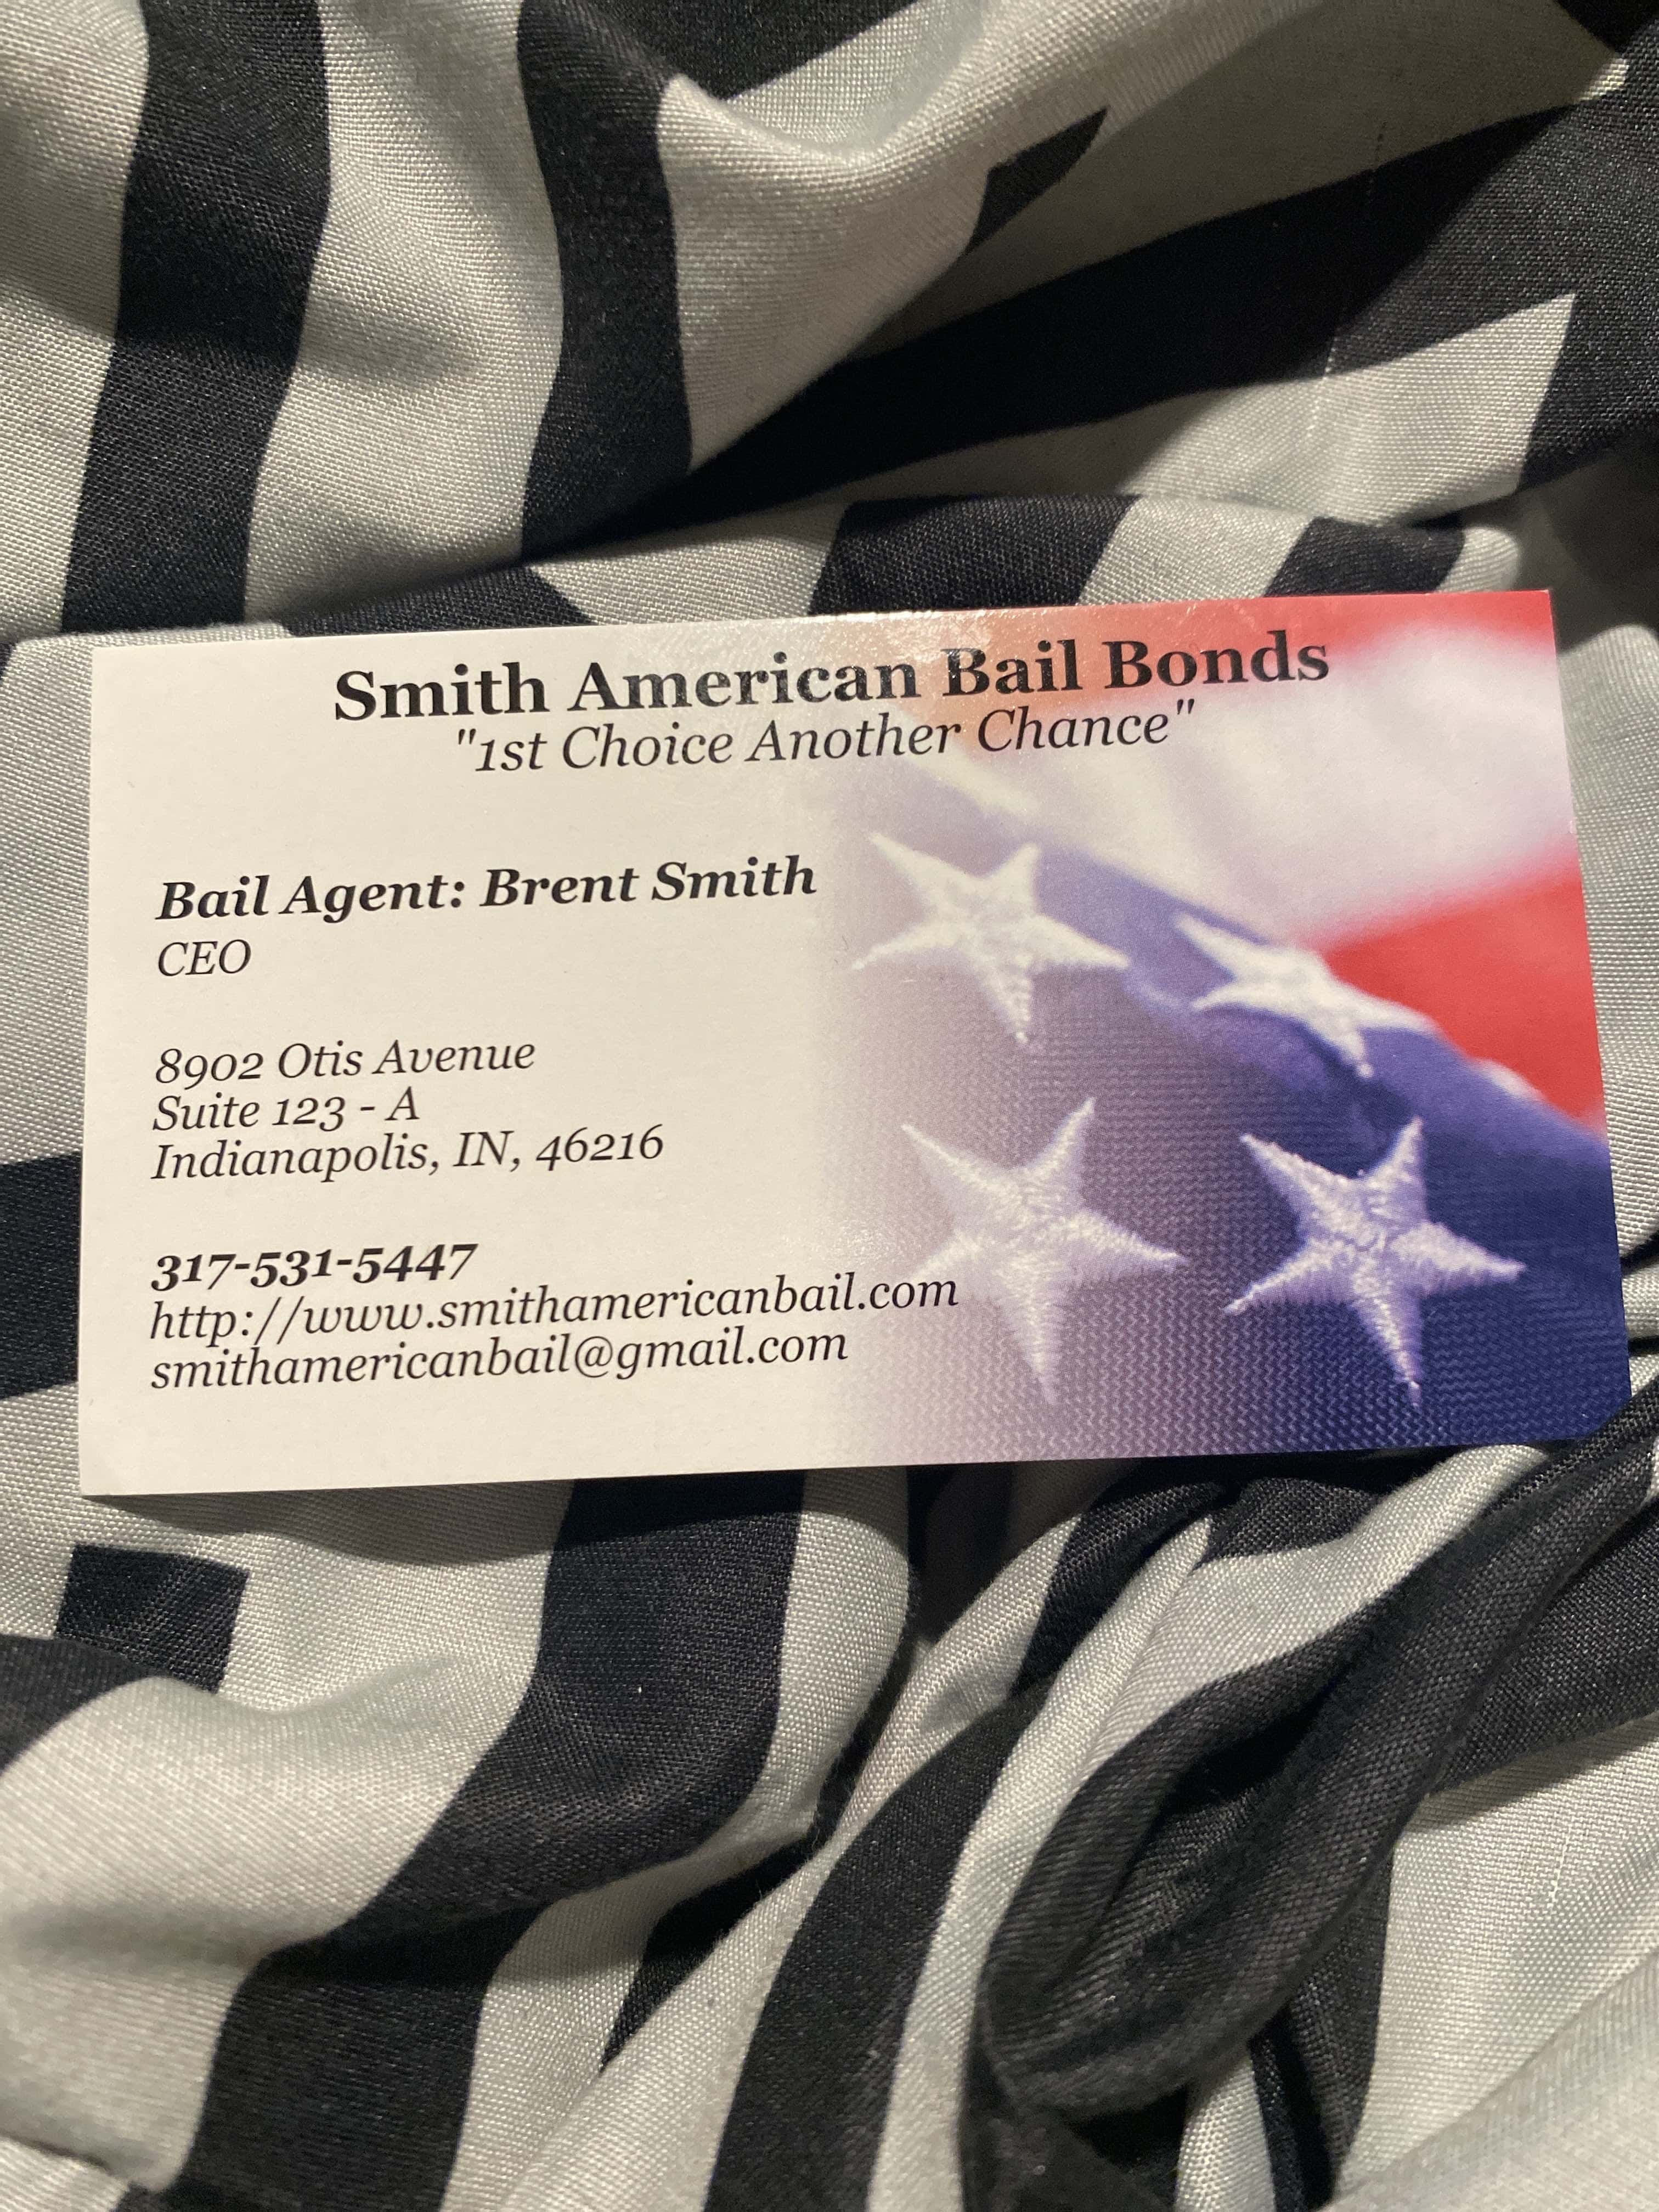 Smith American Bail Bonds - Indianapolis, IN, US, online bonds